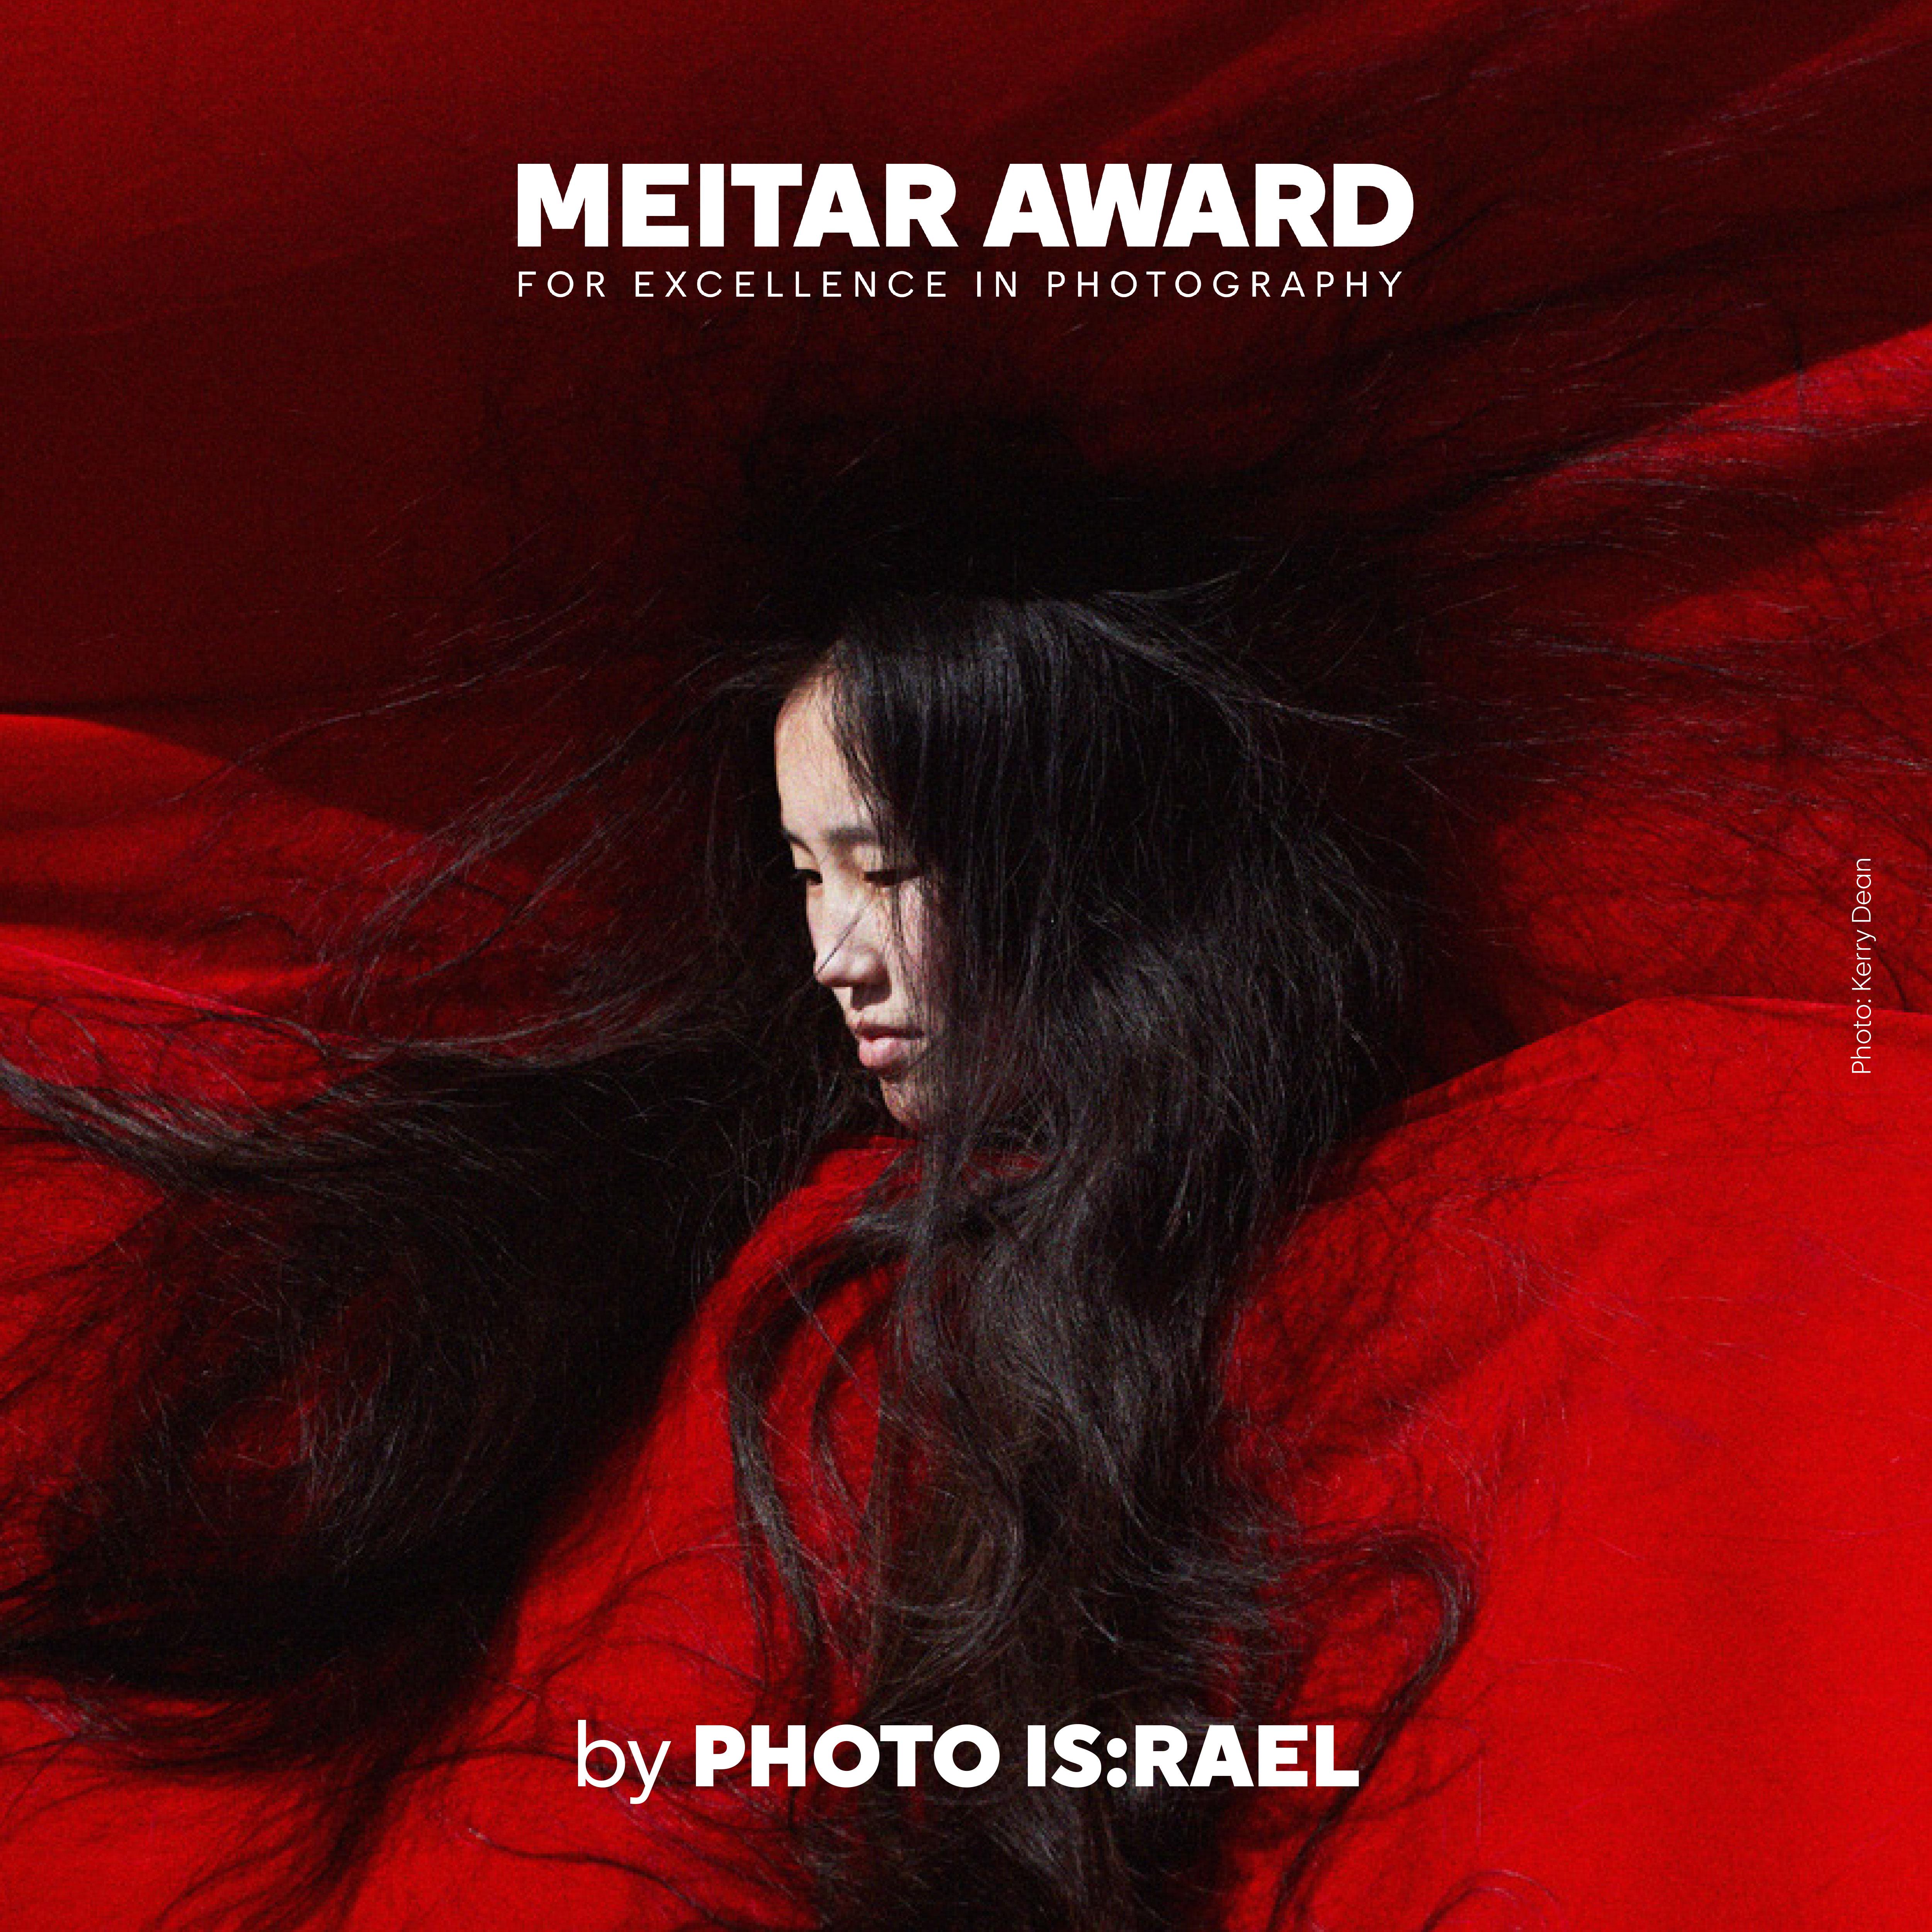 The 2021 Meitar Award for Excellence in Photography